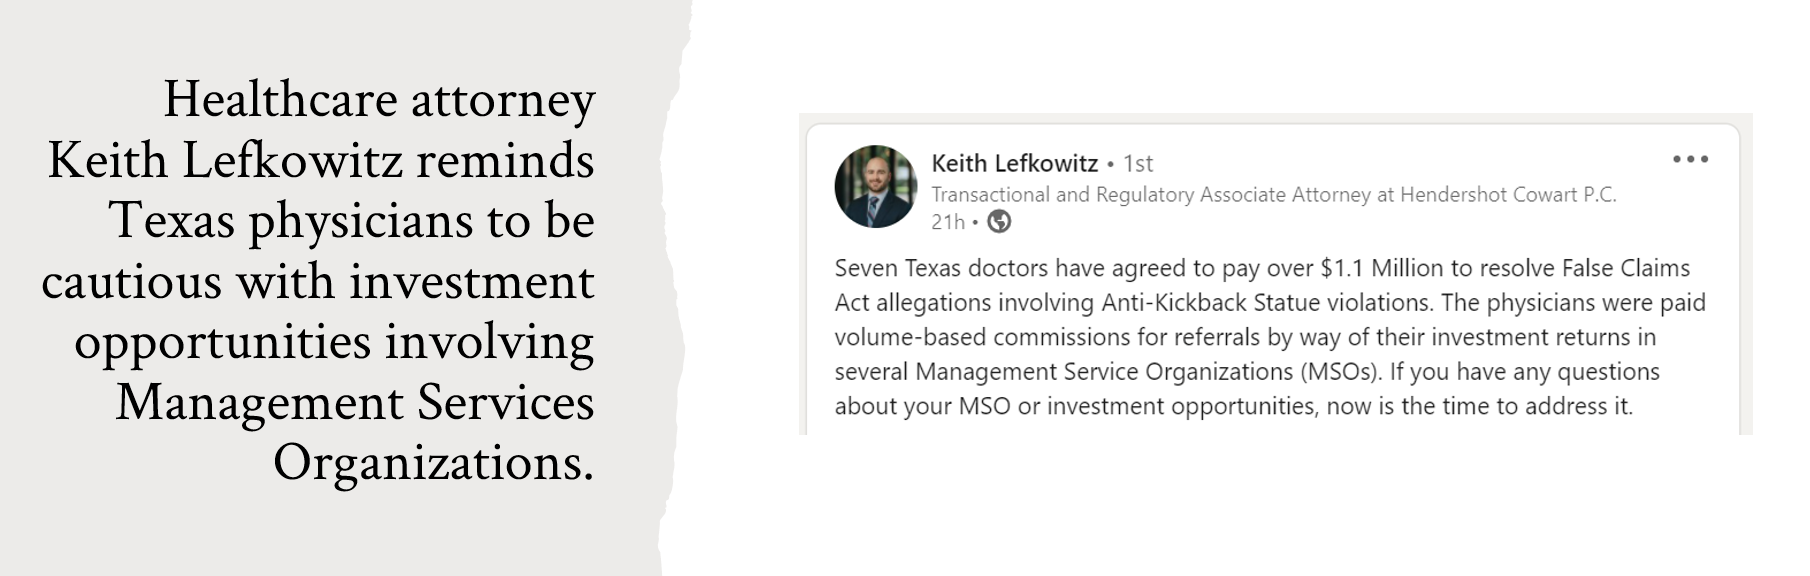 Screenshot of a LinkedIn post by health law attorney Keith Lefkowitz. He writes, "Seven Texas doctors have agreed to pay over $1.1 Million to resolve False Claims Act allegations involving Anti-Kickback Statue violations. The physicians were paid volume-based commissions for referrals by way of their investment returns in several Management Service Organizations (MSOs). If you have any questions about your MSO or investment opportunities, now is the time to address it."